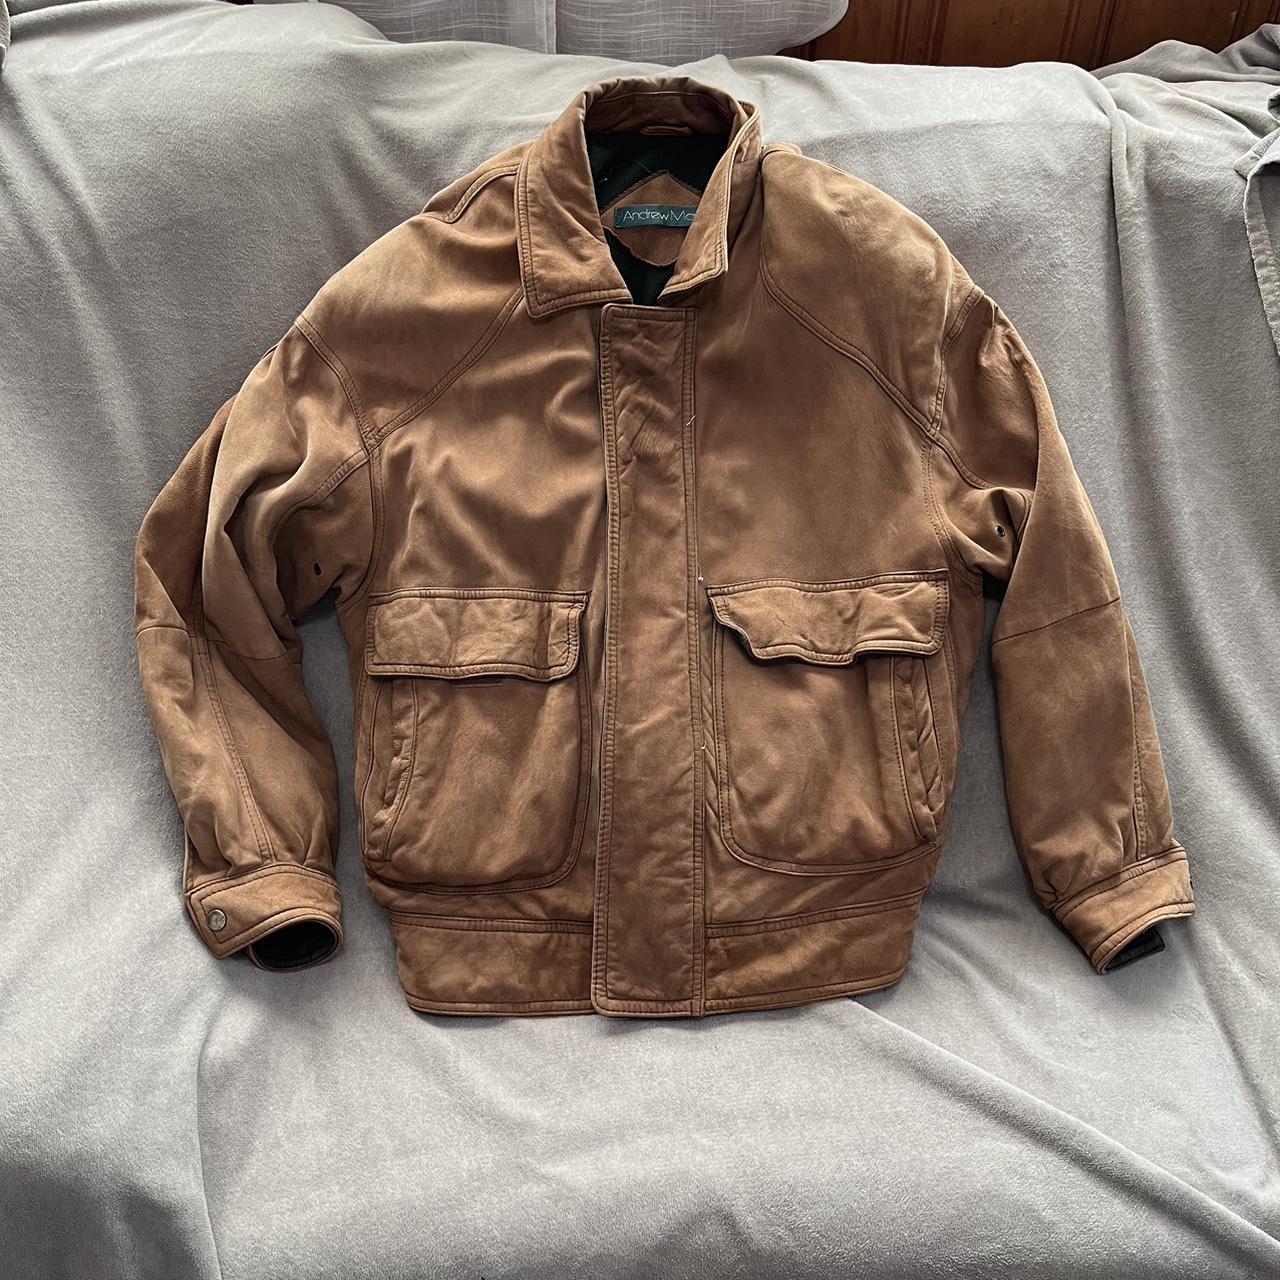 Vintage 80s/90s leather bomber jacket from Andrew... - Depop